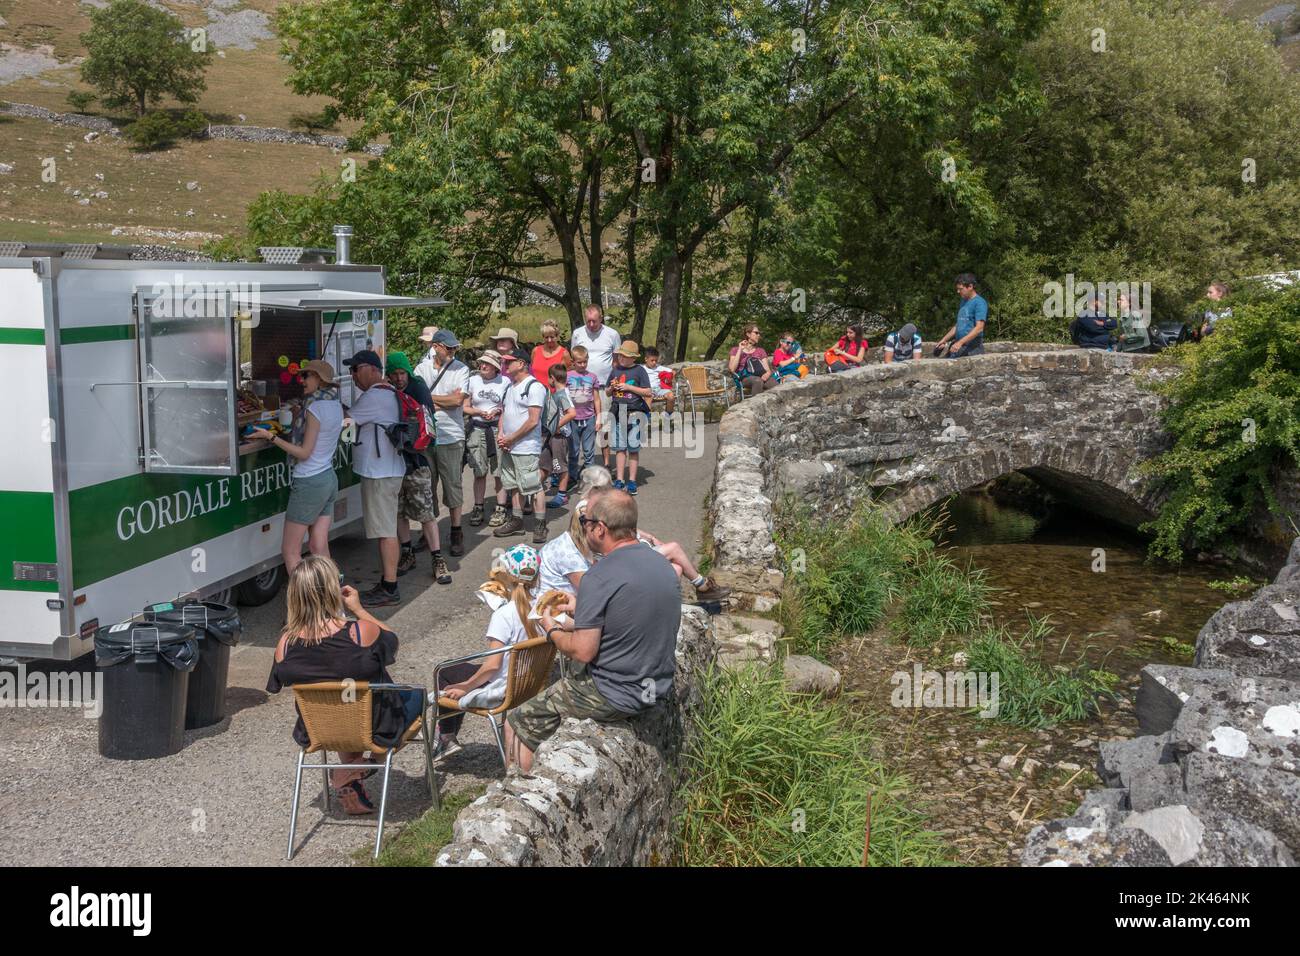 Ice cream van and queue at Gordale Scar on a hot day. Yorkshire Dales National Park, UK Stock Photo